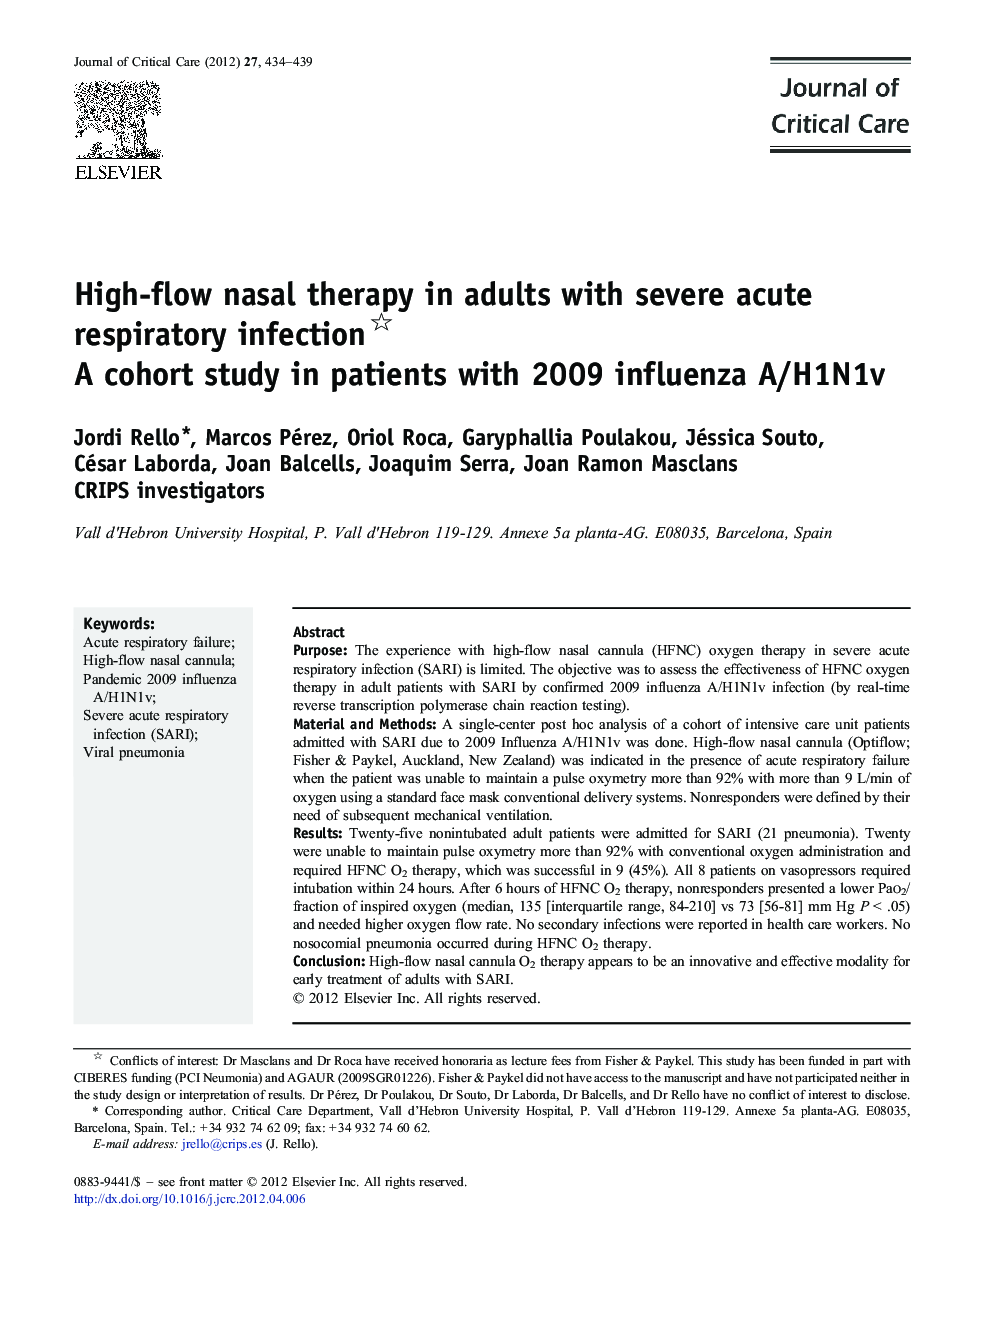 Infection/RespiratoryHigh-flow nasal therapy in adults with severe acute respiratory infection: A cohort study in patients with 2009 influenza A/H1N1v